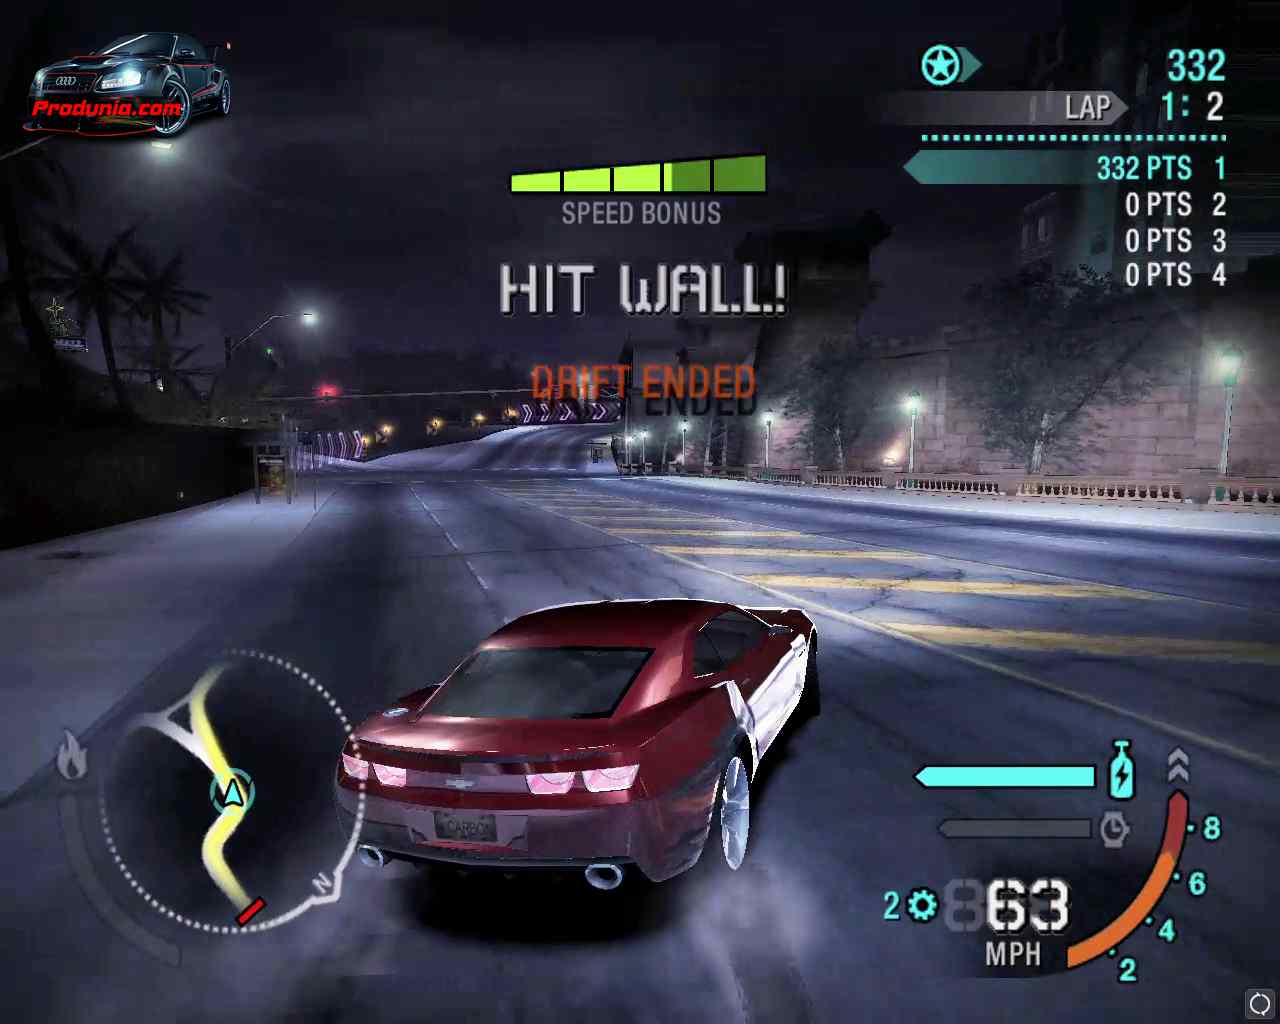 download nfs rivals highly compressed